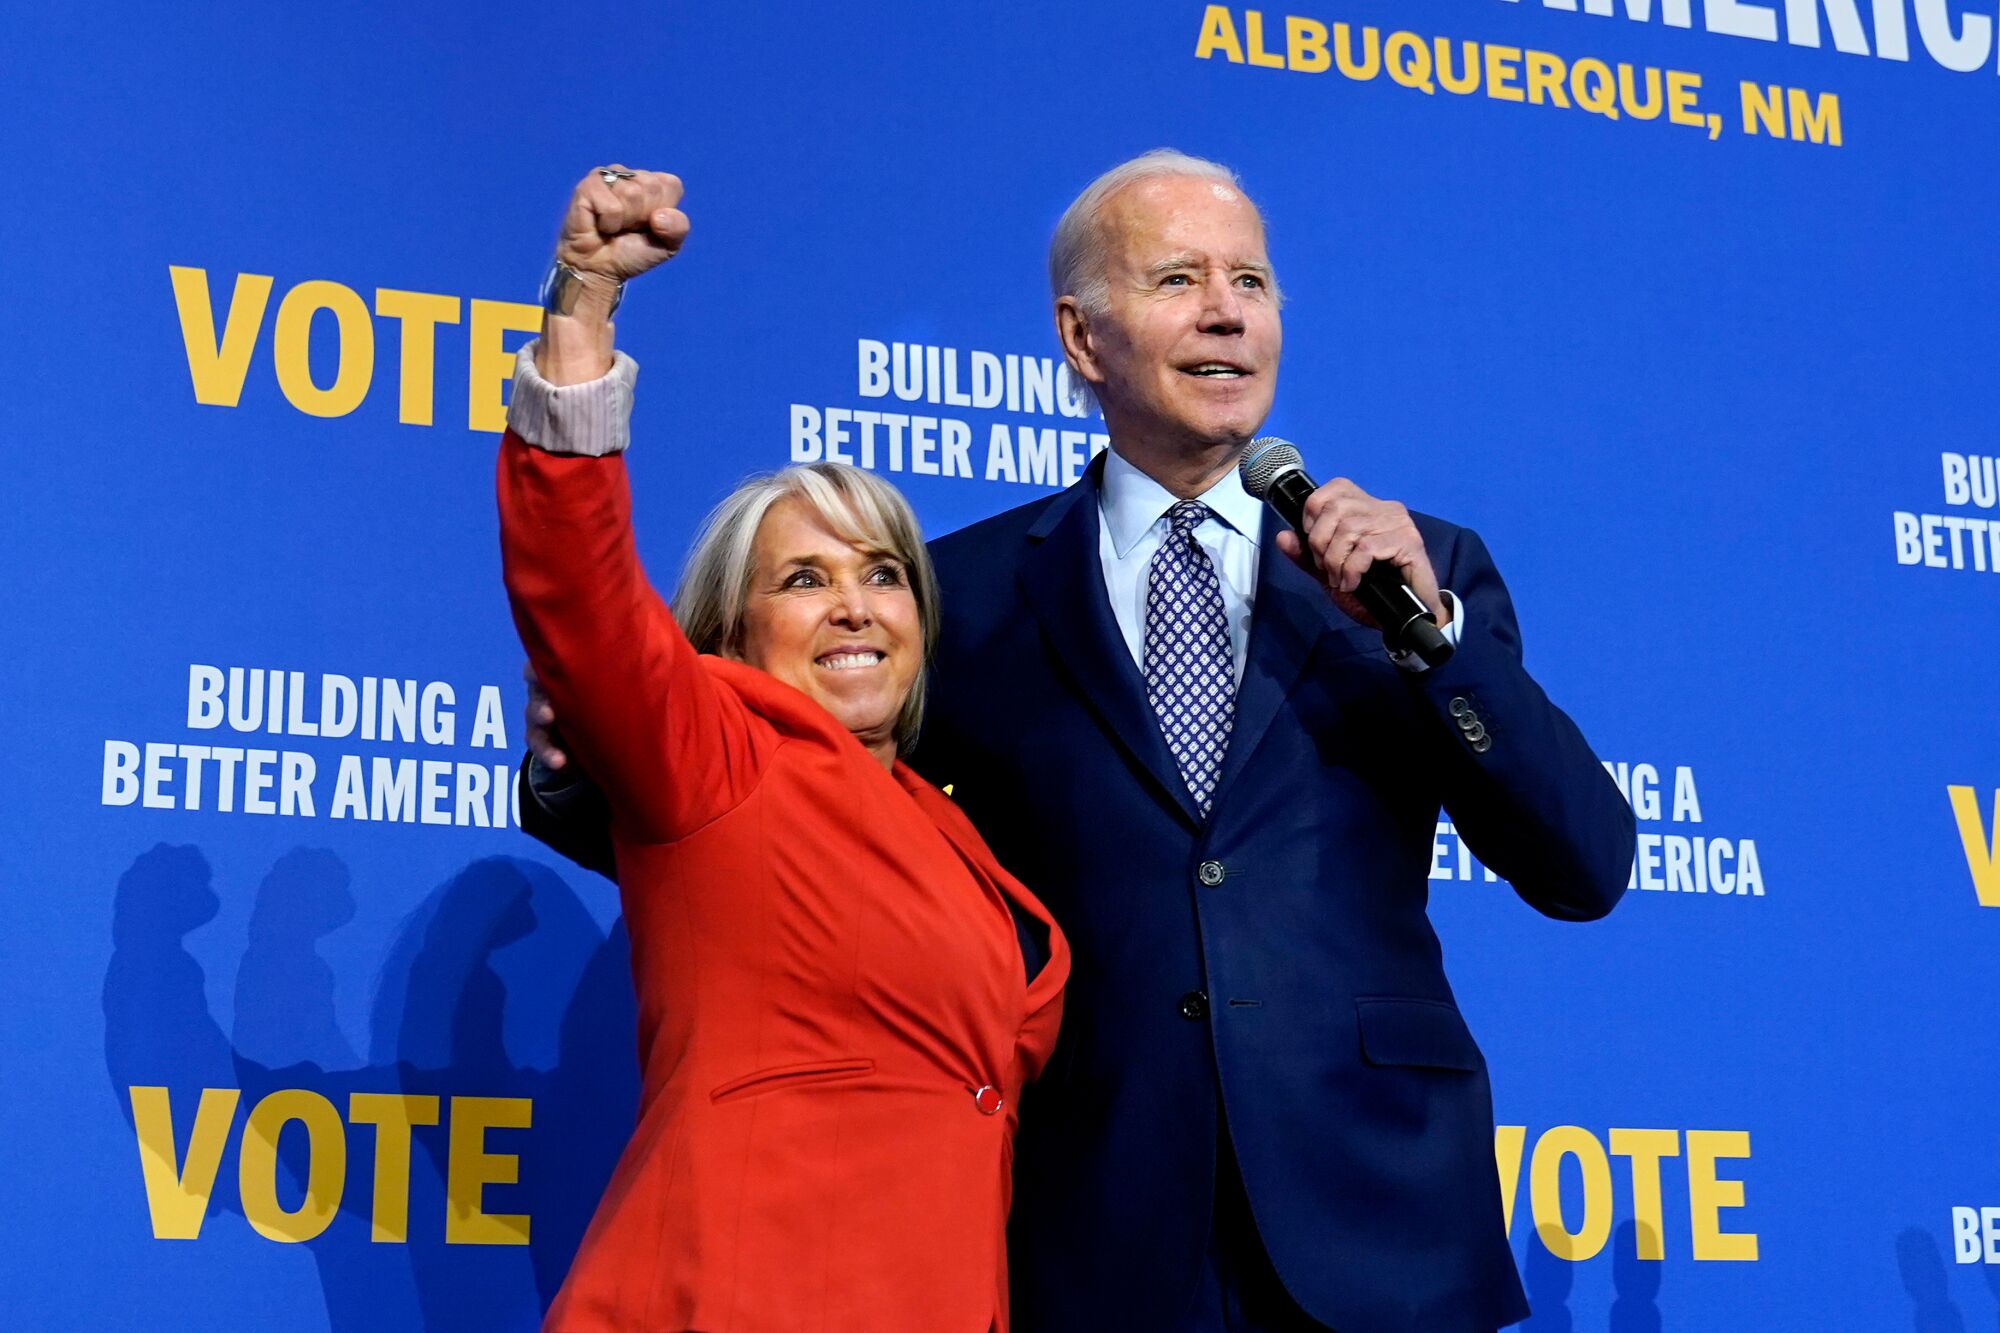 A woman with blond hair, in a red suit, raises a fist next to an older man in dark suit and striped tie holding a microphone 